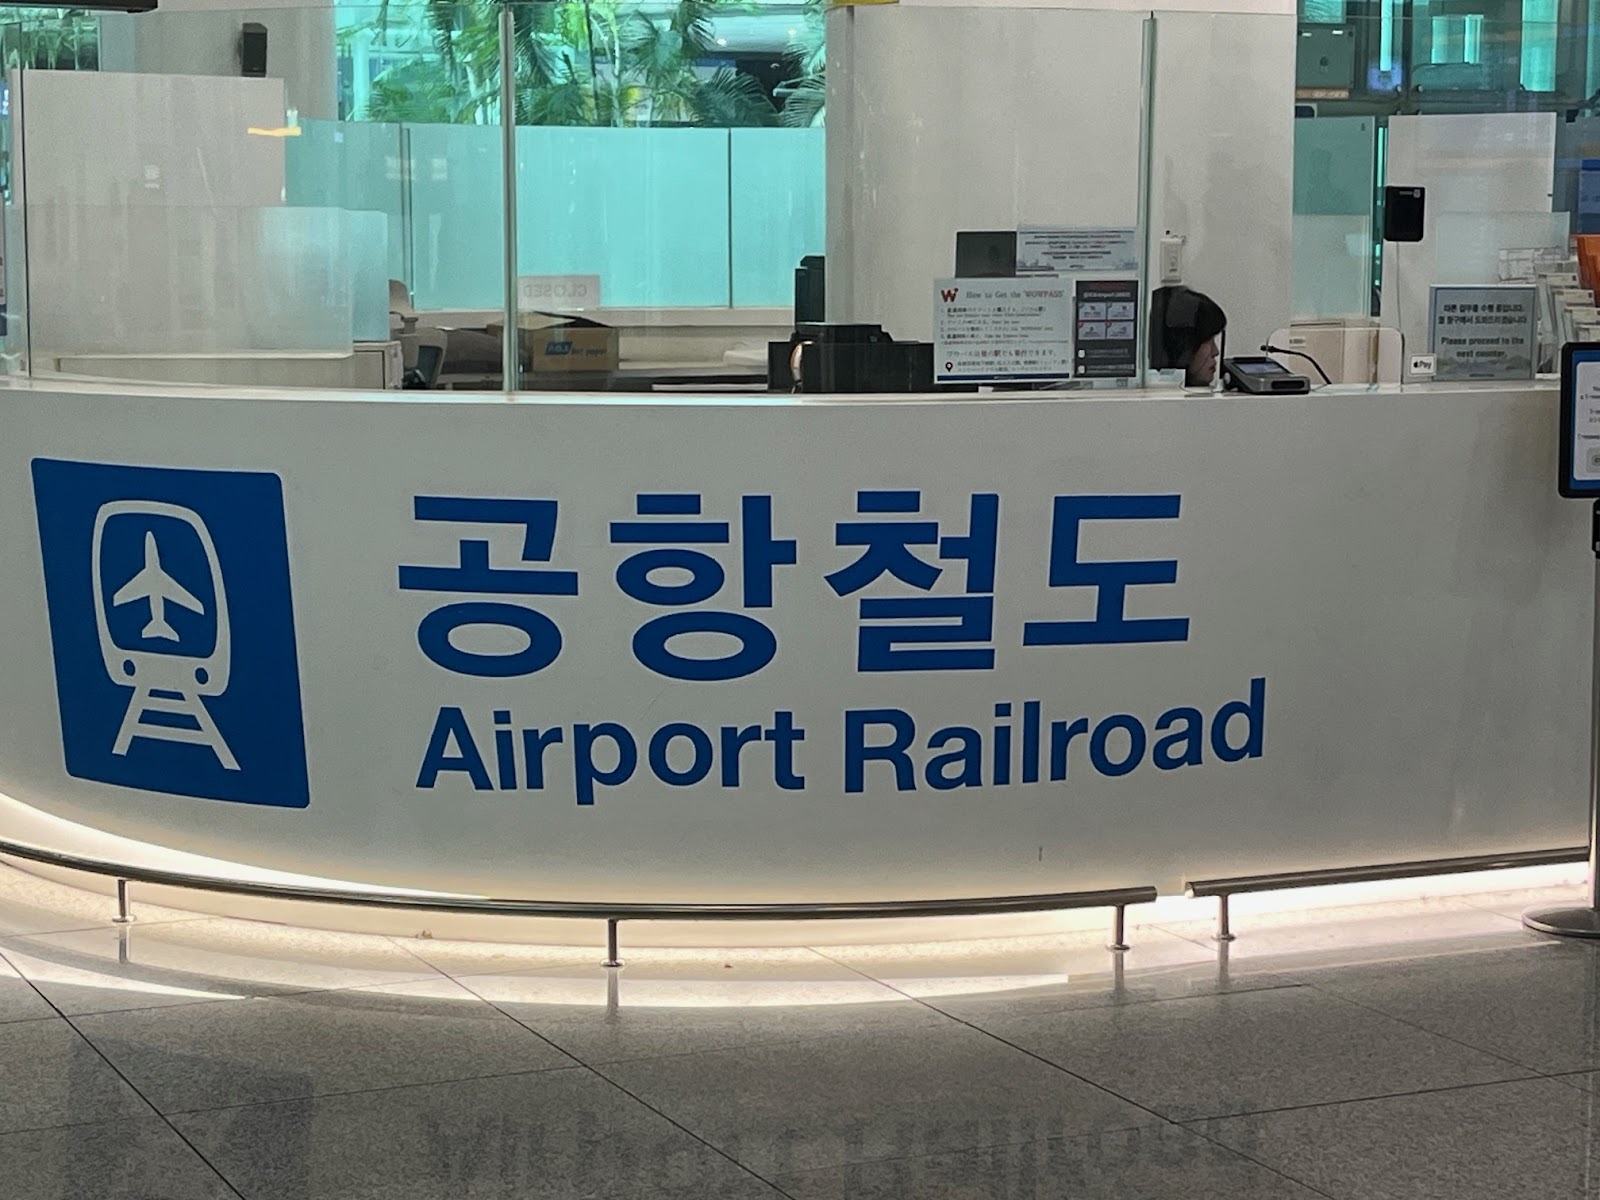 I thought the words together Airport Railroad were kinda funny.  Thus the reason for the photograph.  